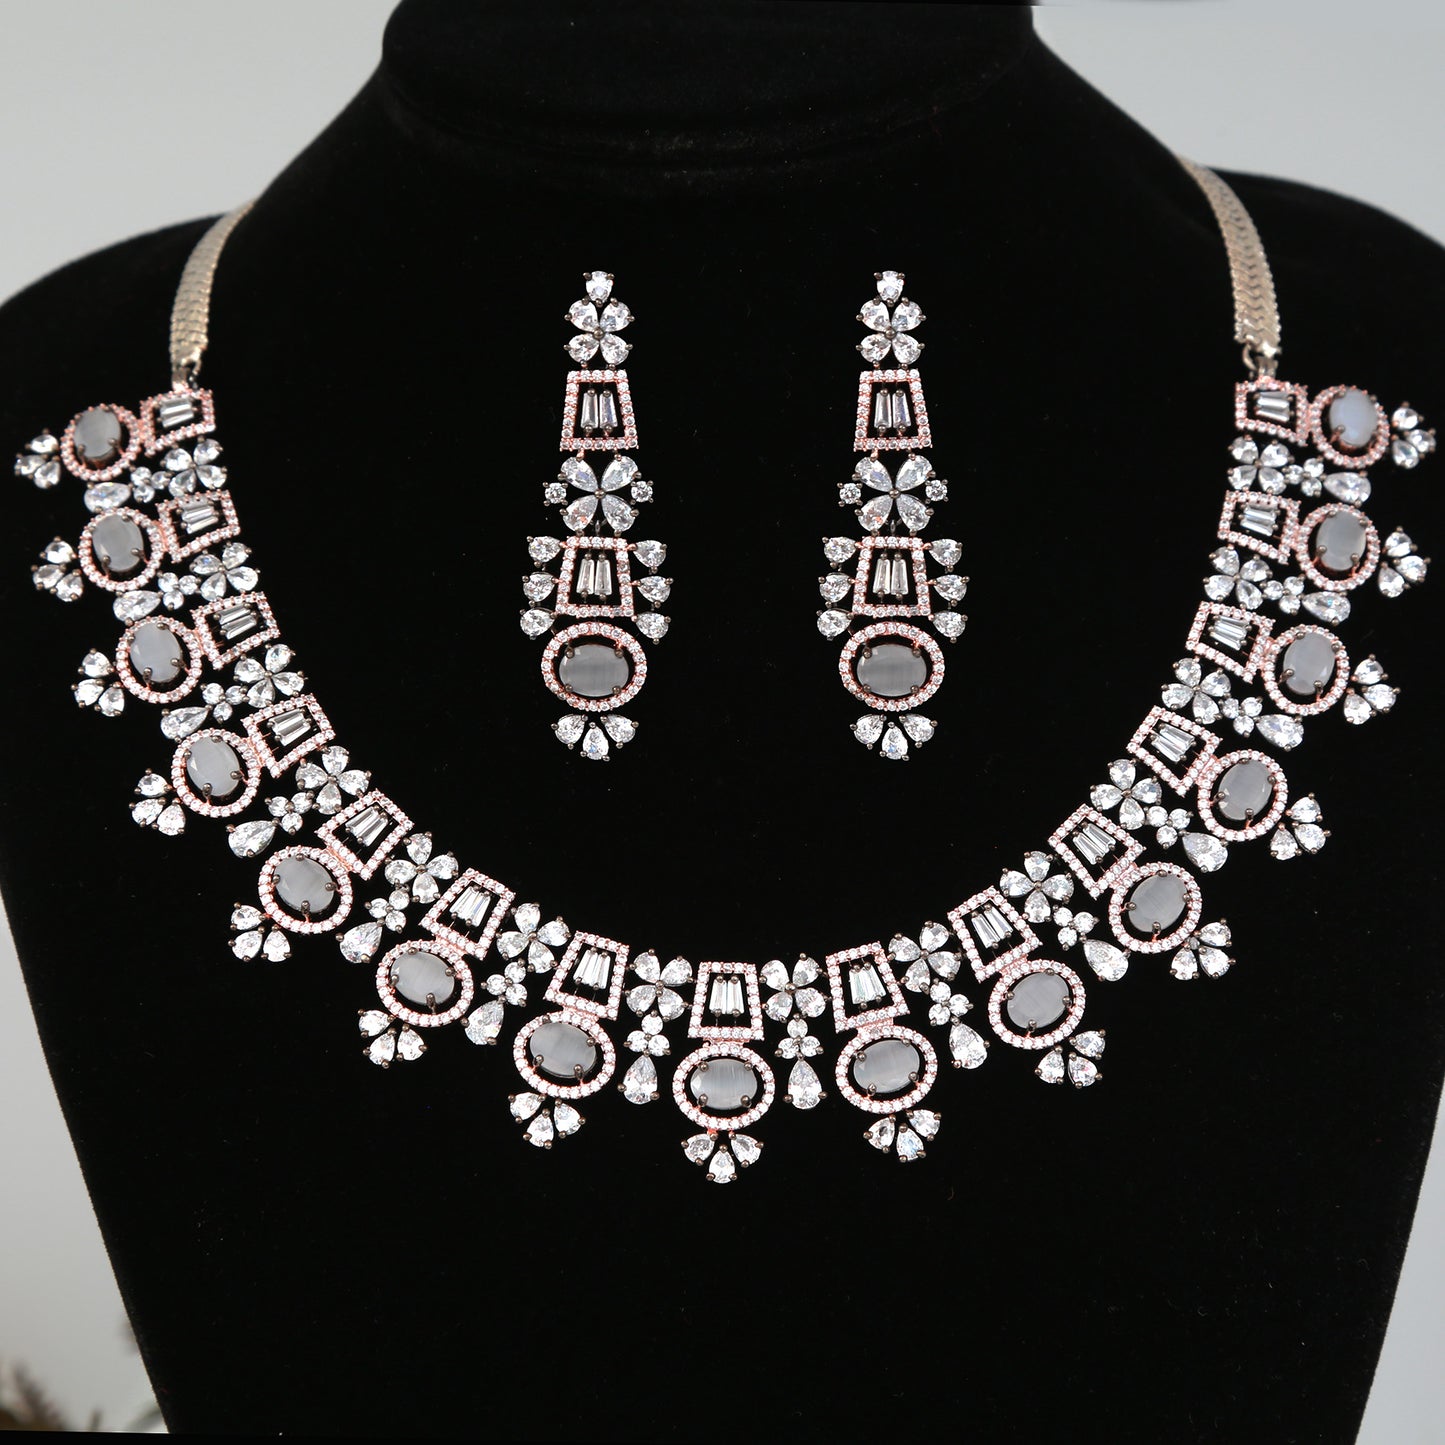 Exclusive Quality American Diamond Black rose Oxidized Grey Stone Necklace Earring set